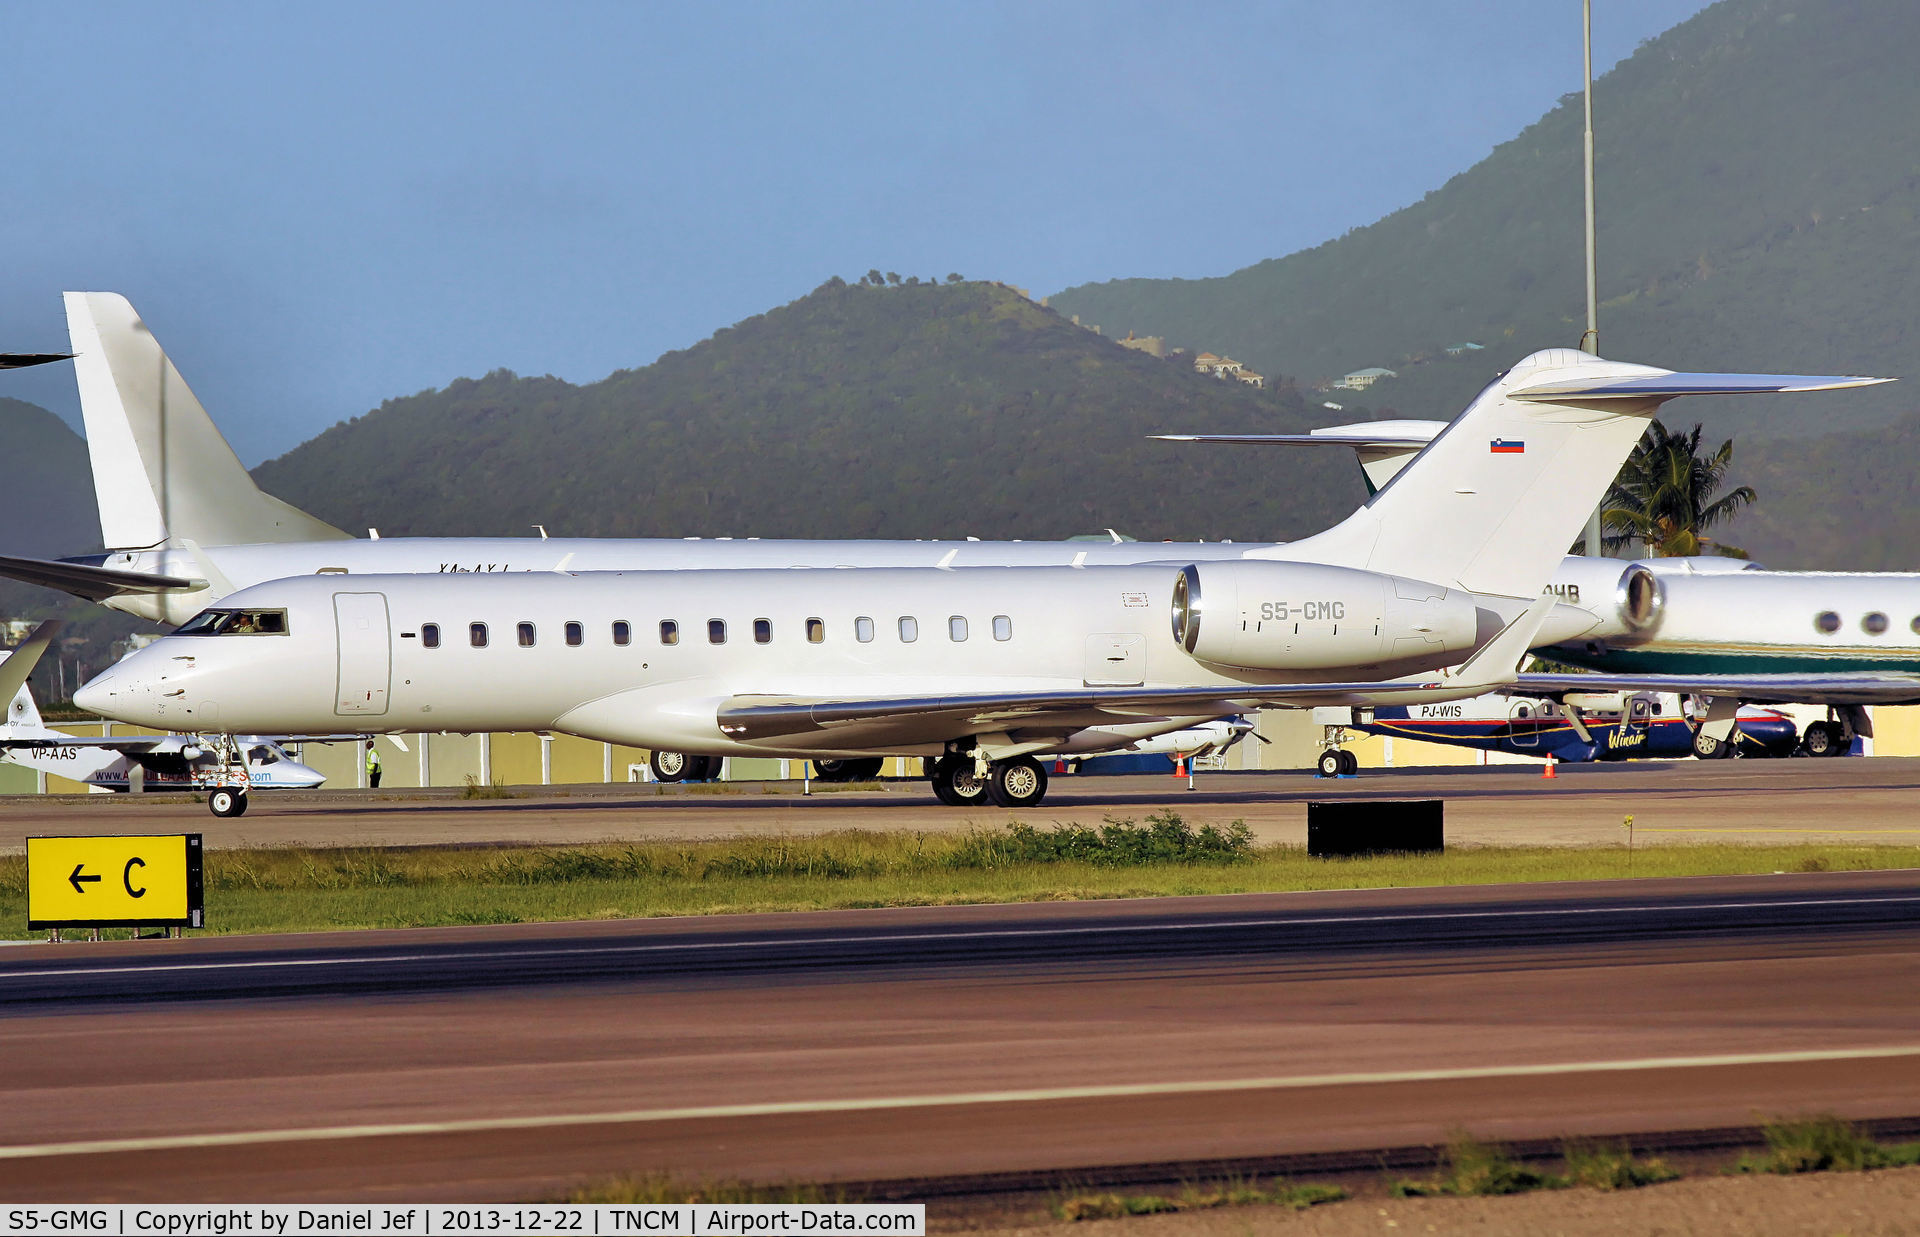 S5-GMG, 2010 Bombardier BD-700-1A10 Global Express C/N 9409, S5-GMG